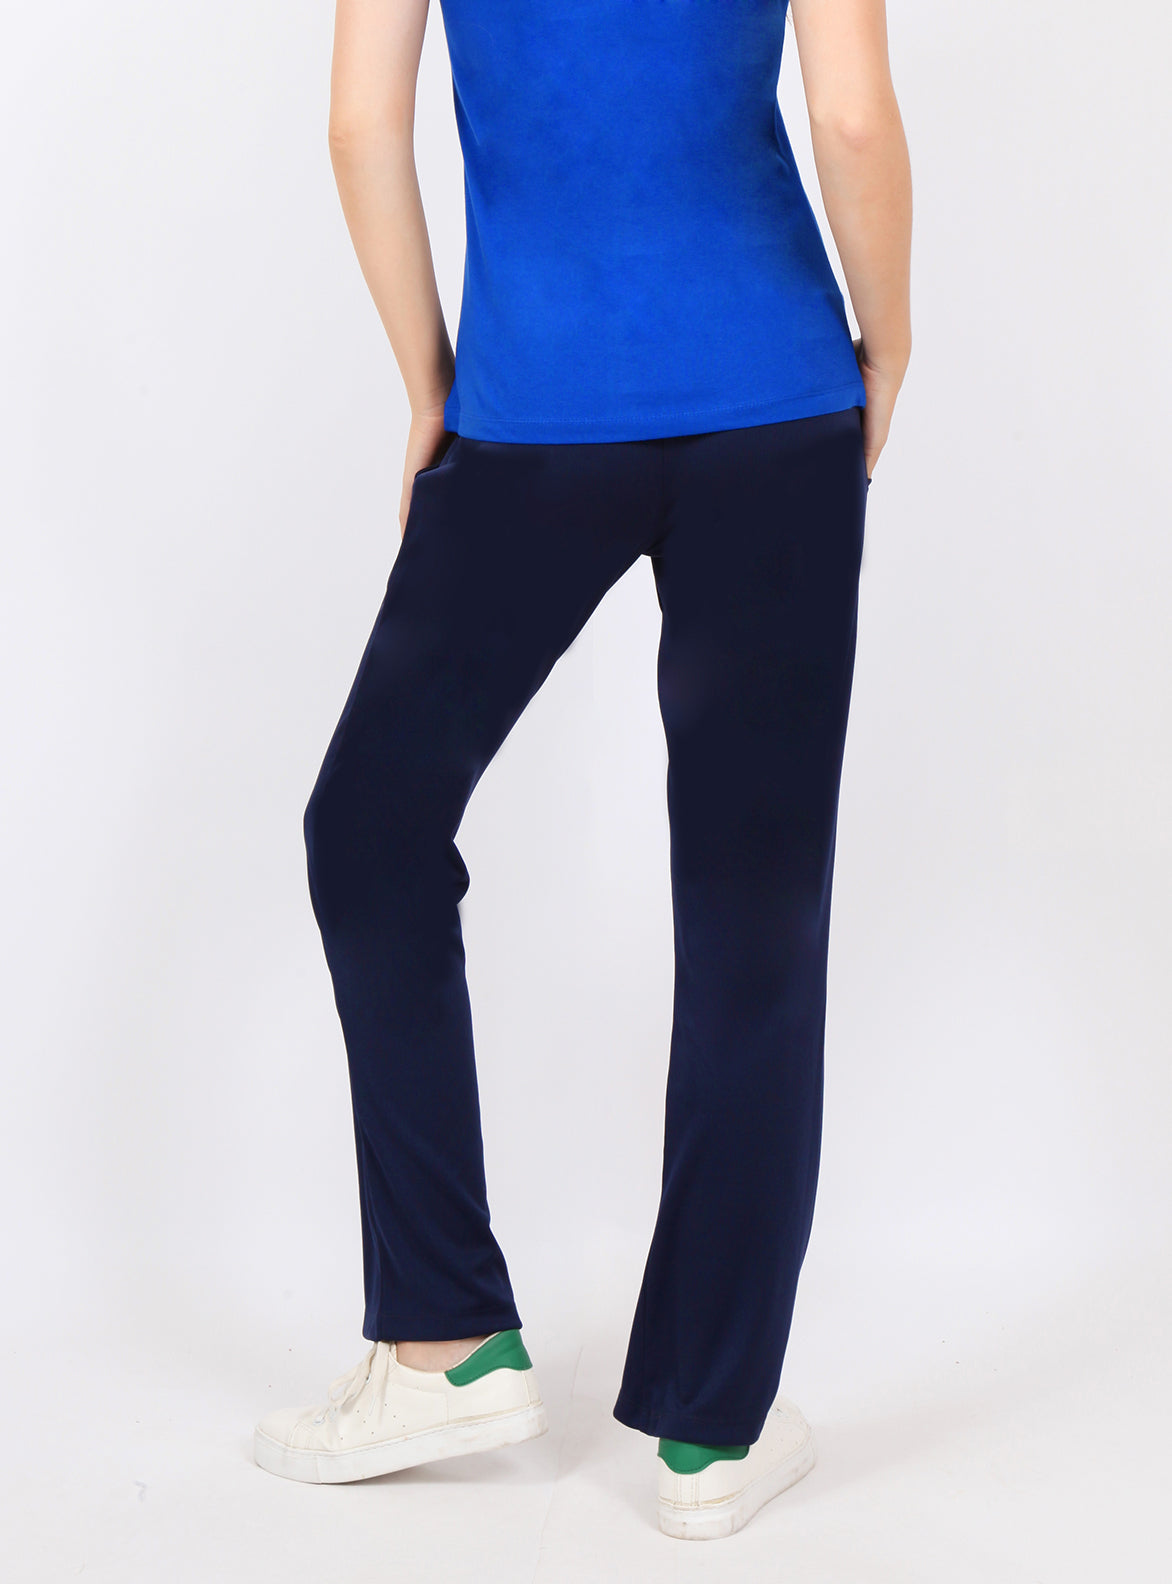 NAVY BLUE BELL BOTTOM PANTS FOR WOMEN at Rs 249, Surat